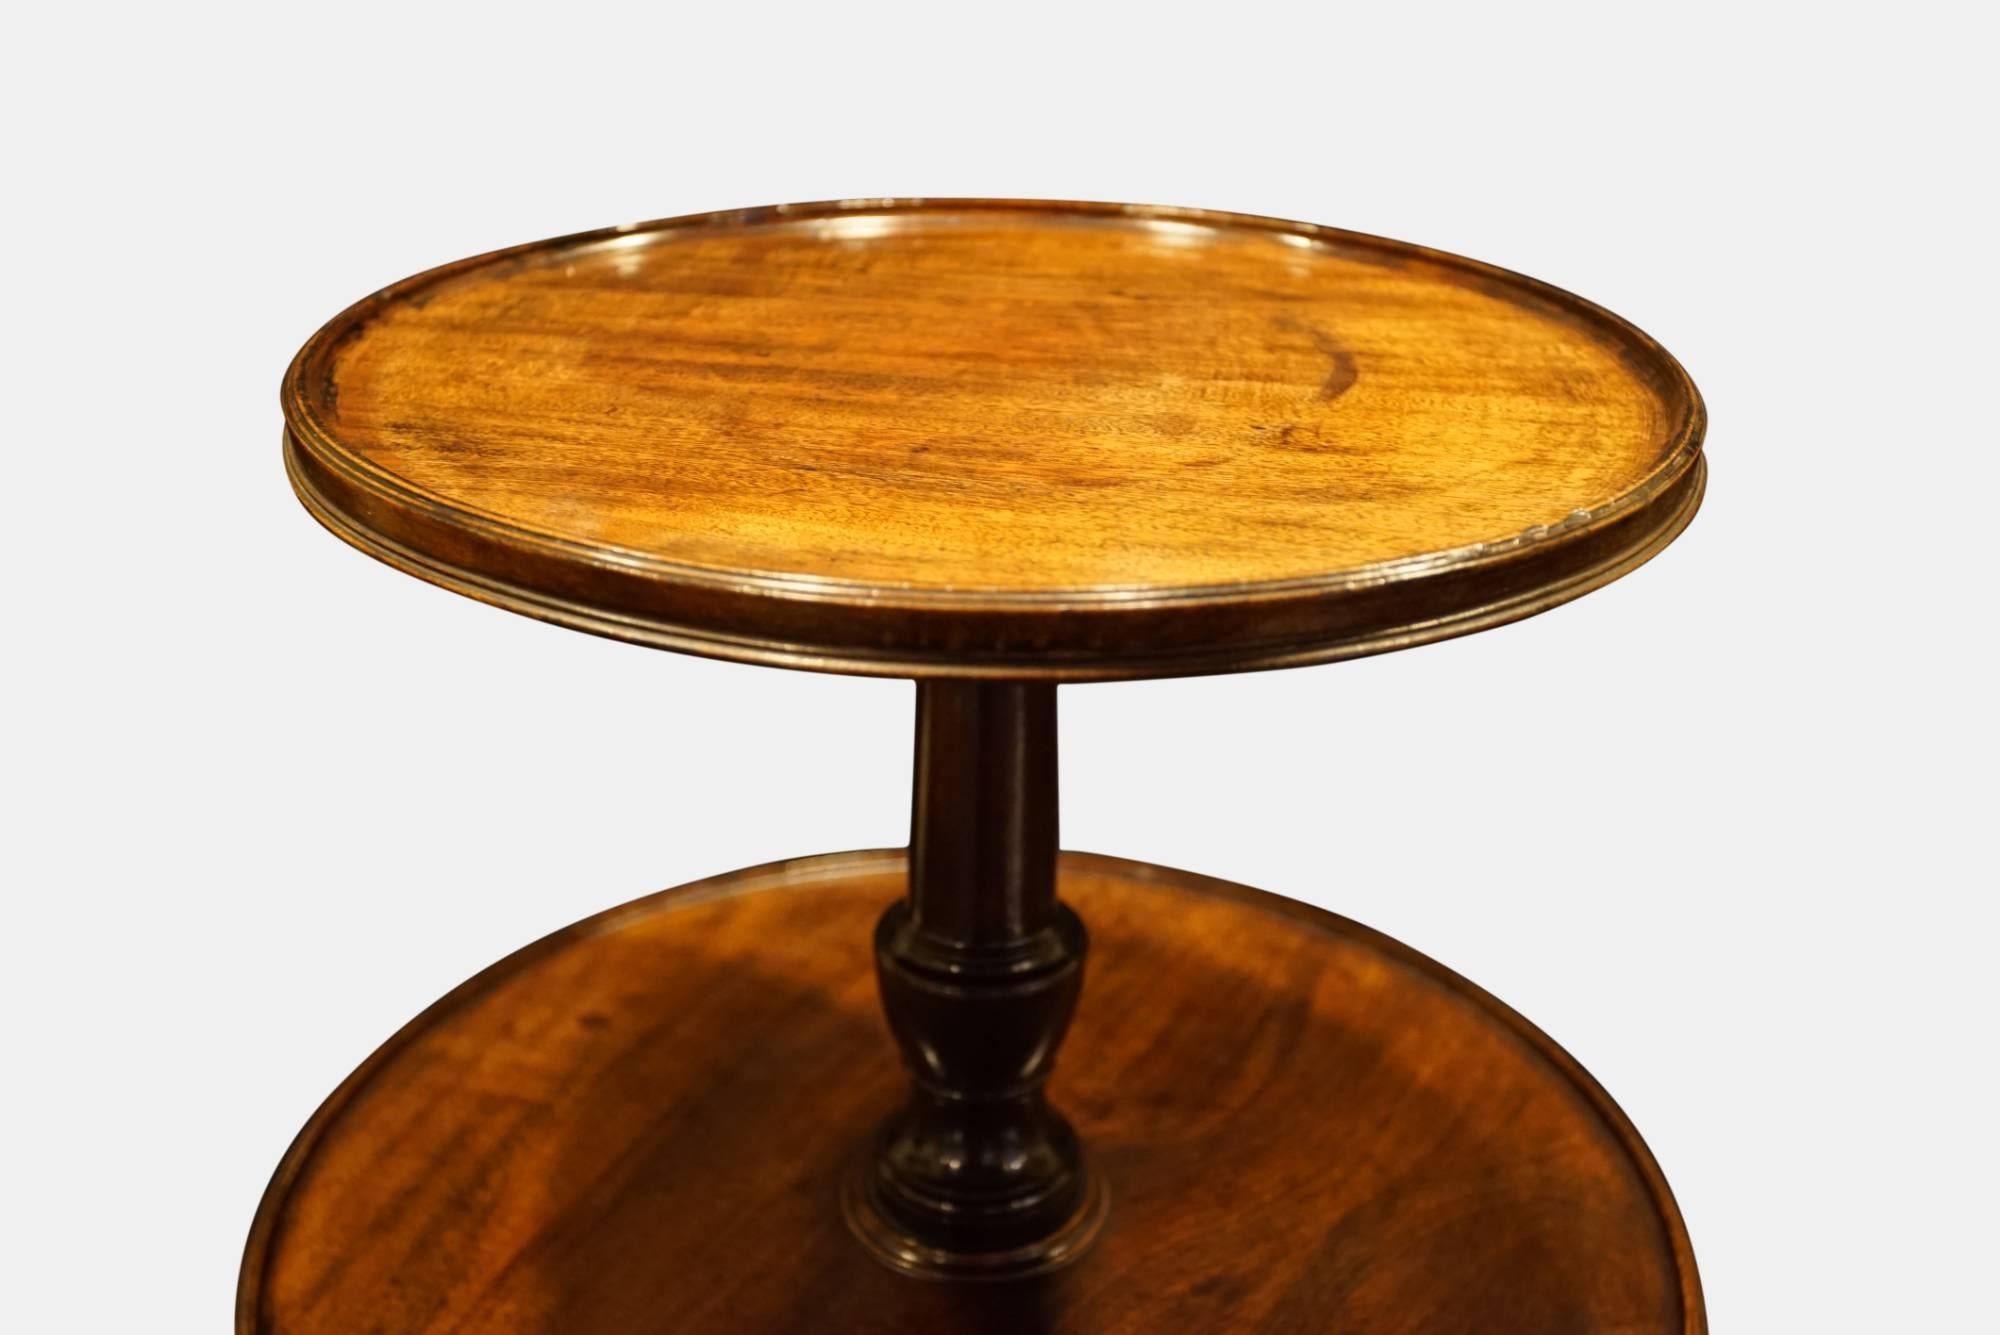 A George III mahogany dumb waiter with three revolving tray tops, vase turned columns and tripod base to original castors, all of excellent color and no splits or repairs,

circa 1775.
 